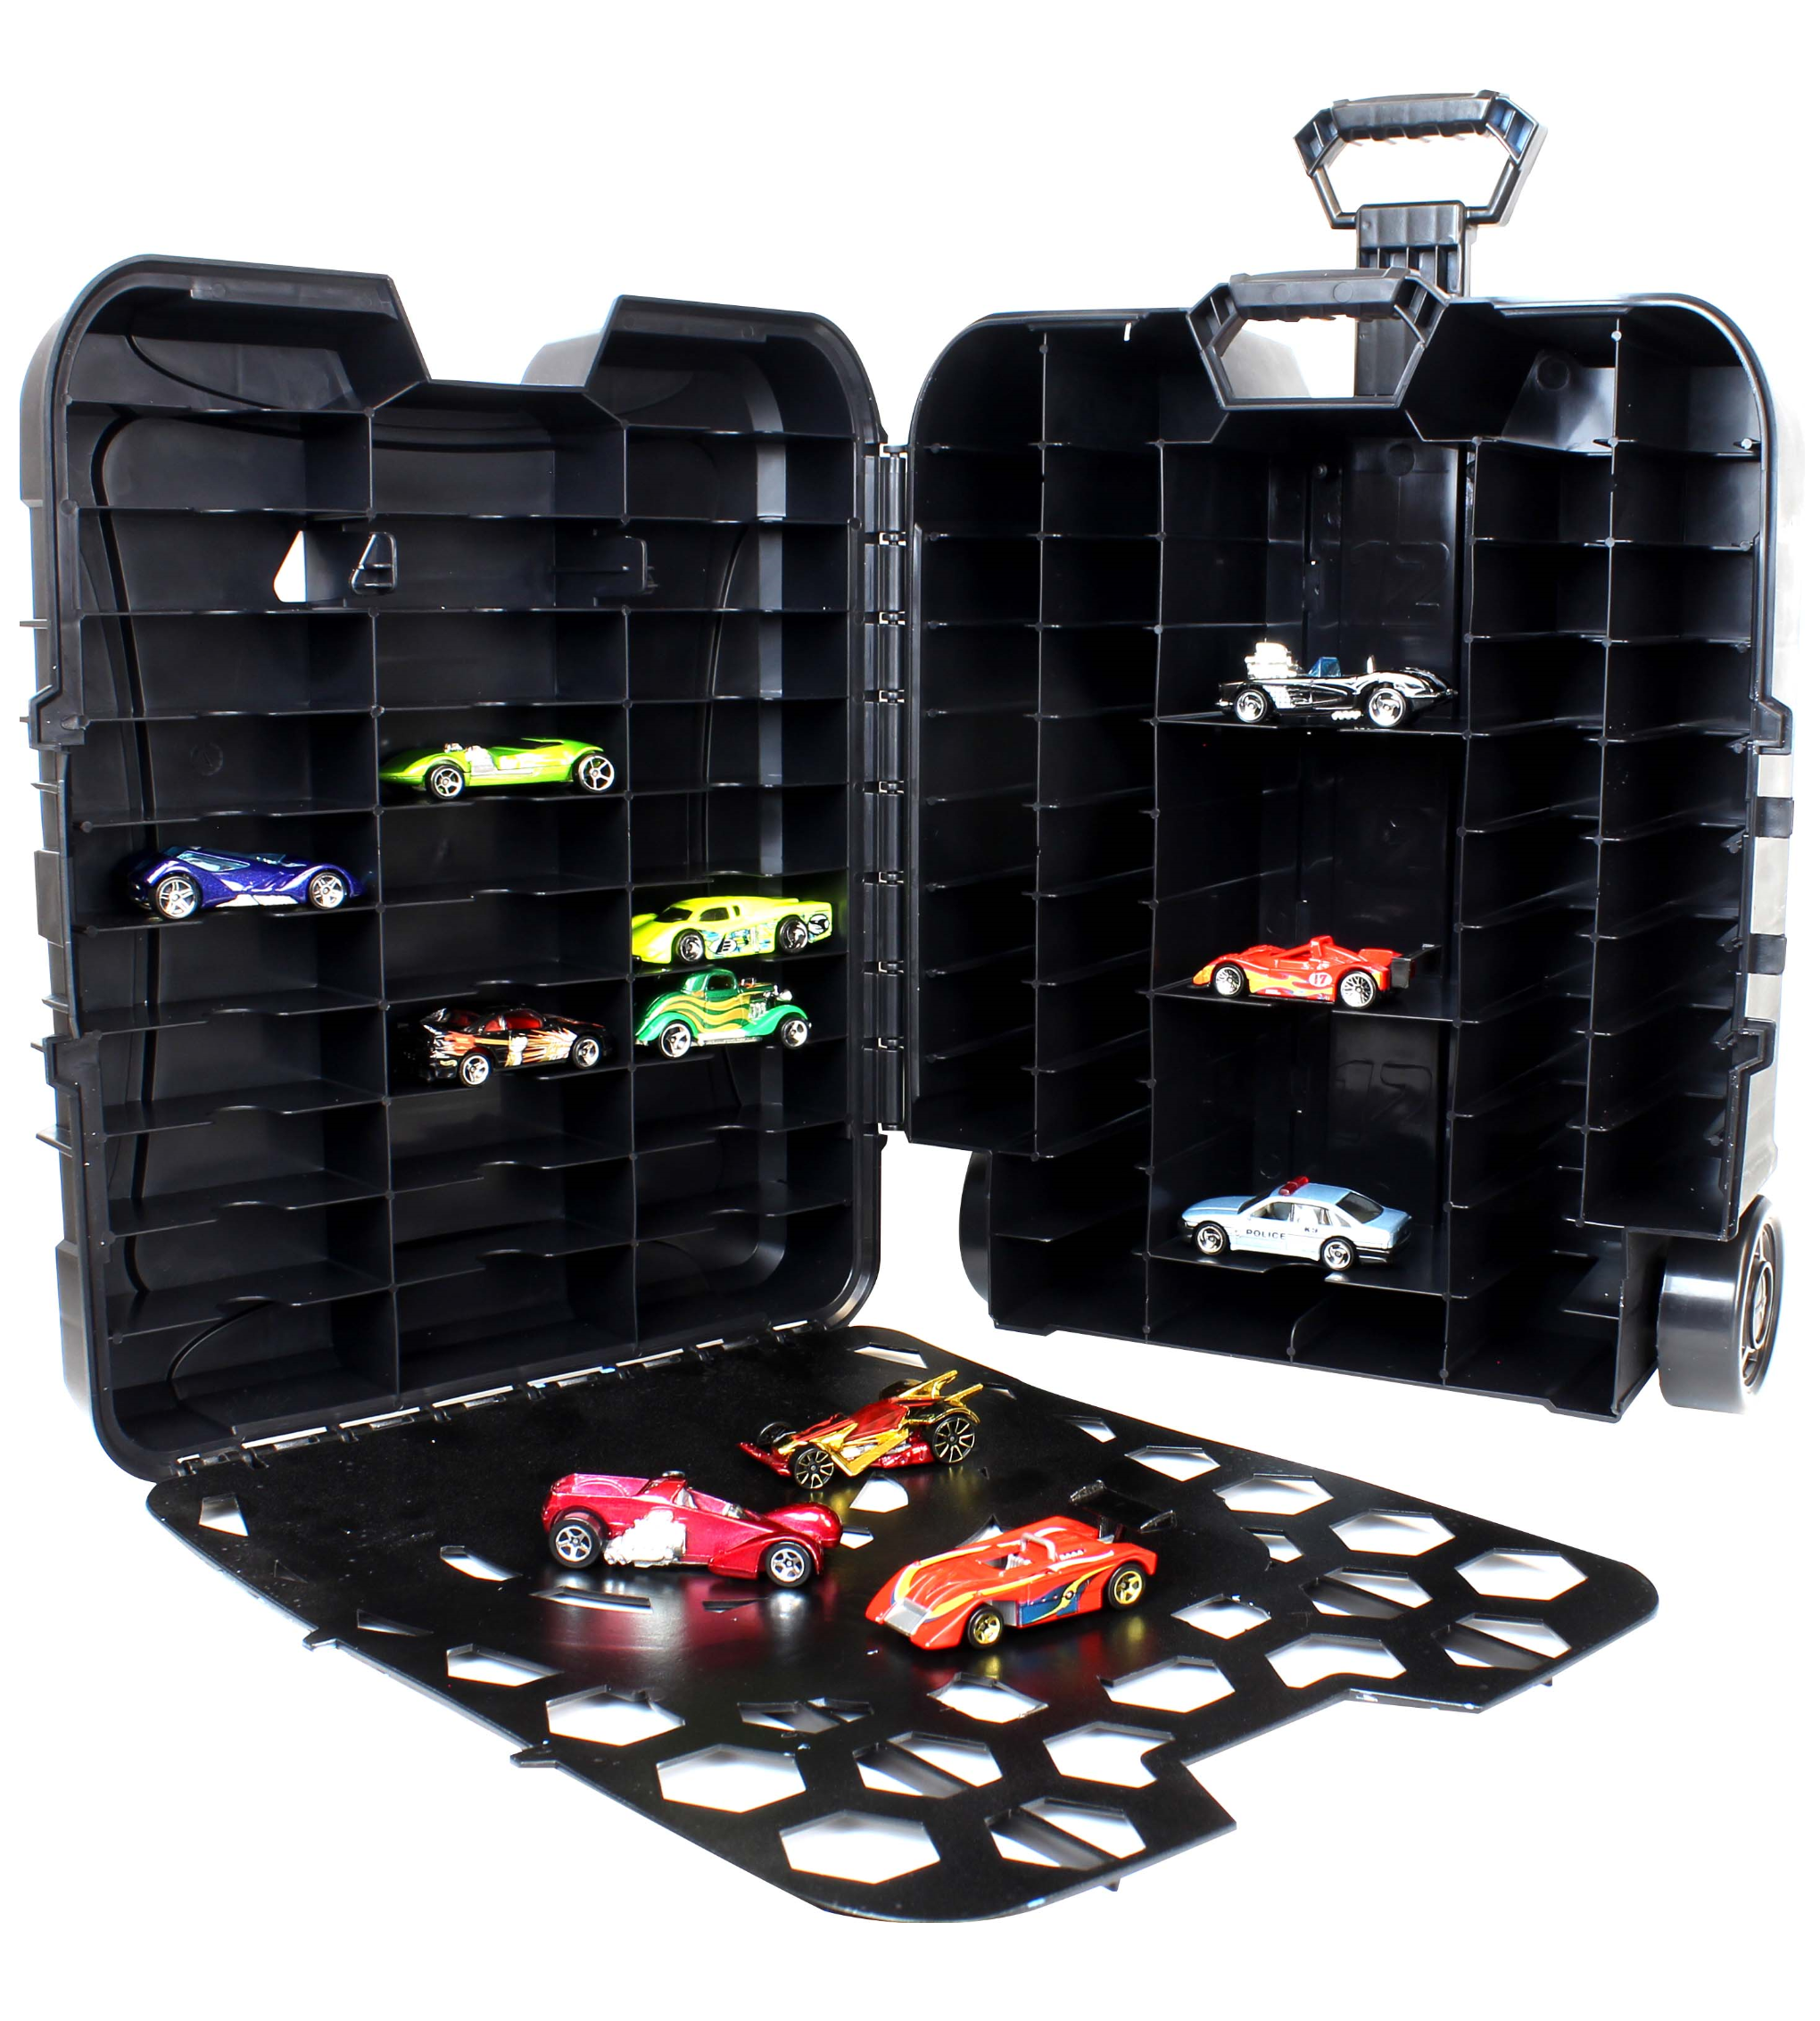 Hot Wheels 110 Vehicle Playsets Plastic Carrying Case in Black, for Child Ages 3+ - image 3 of 5